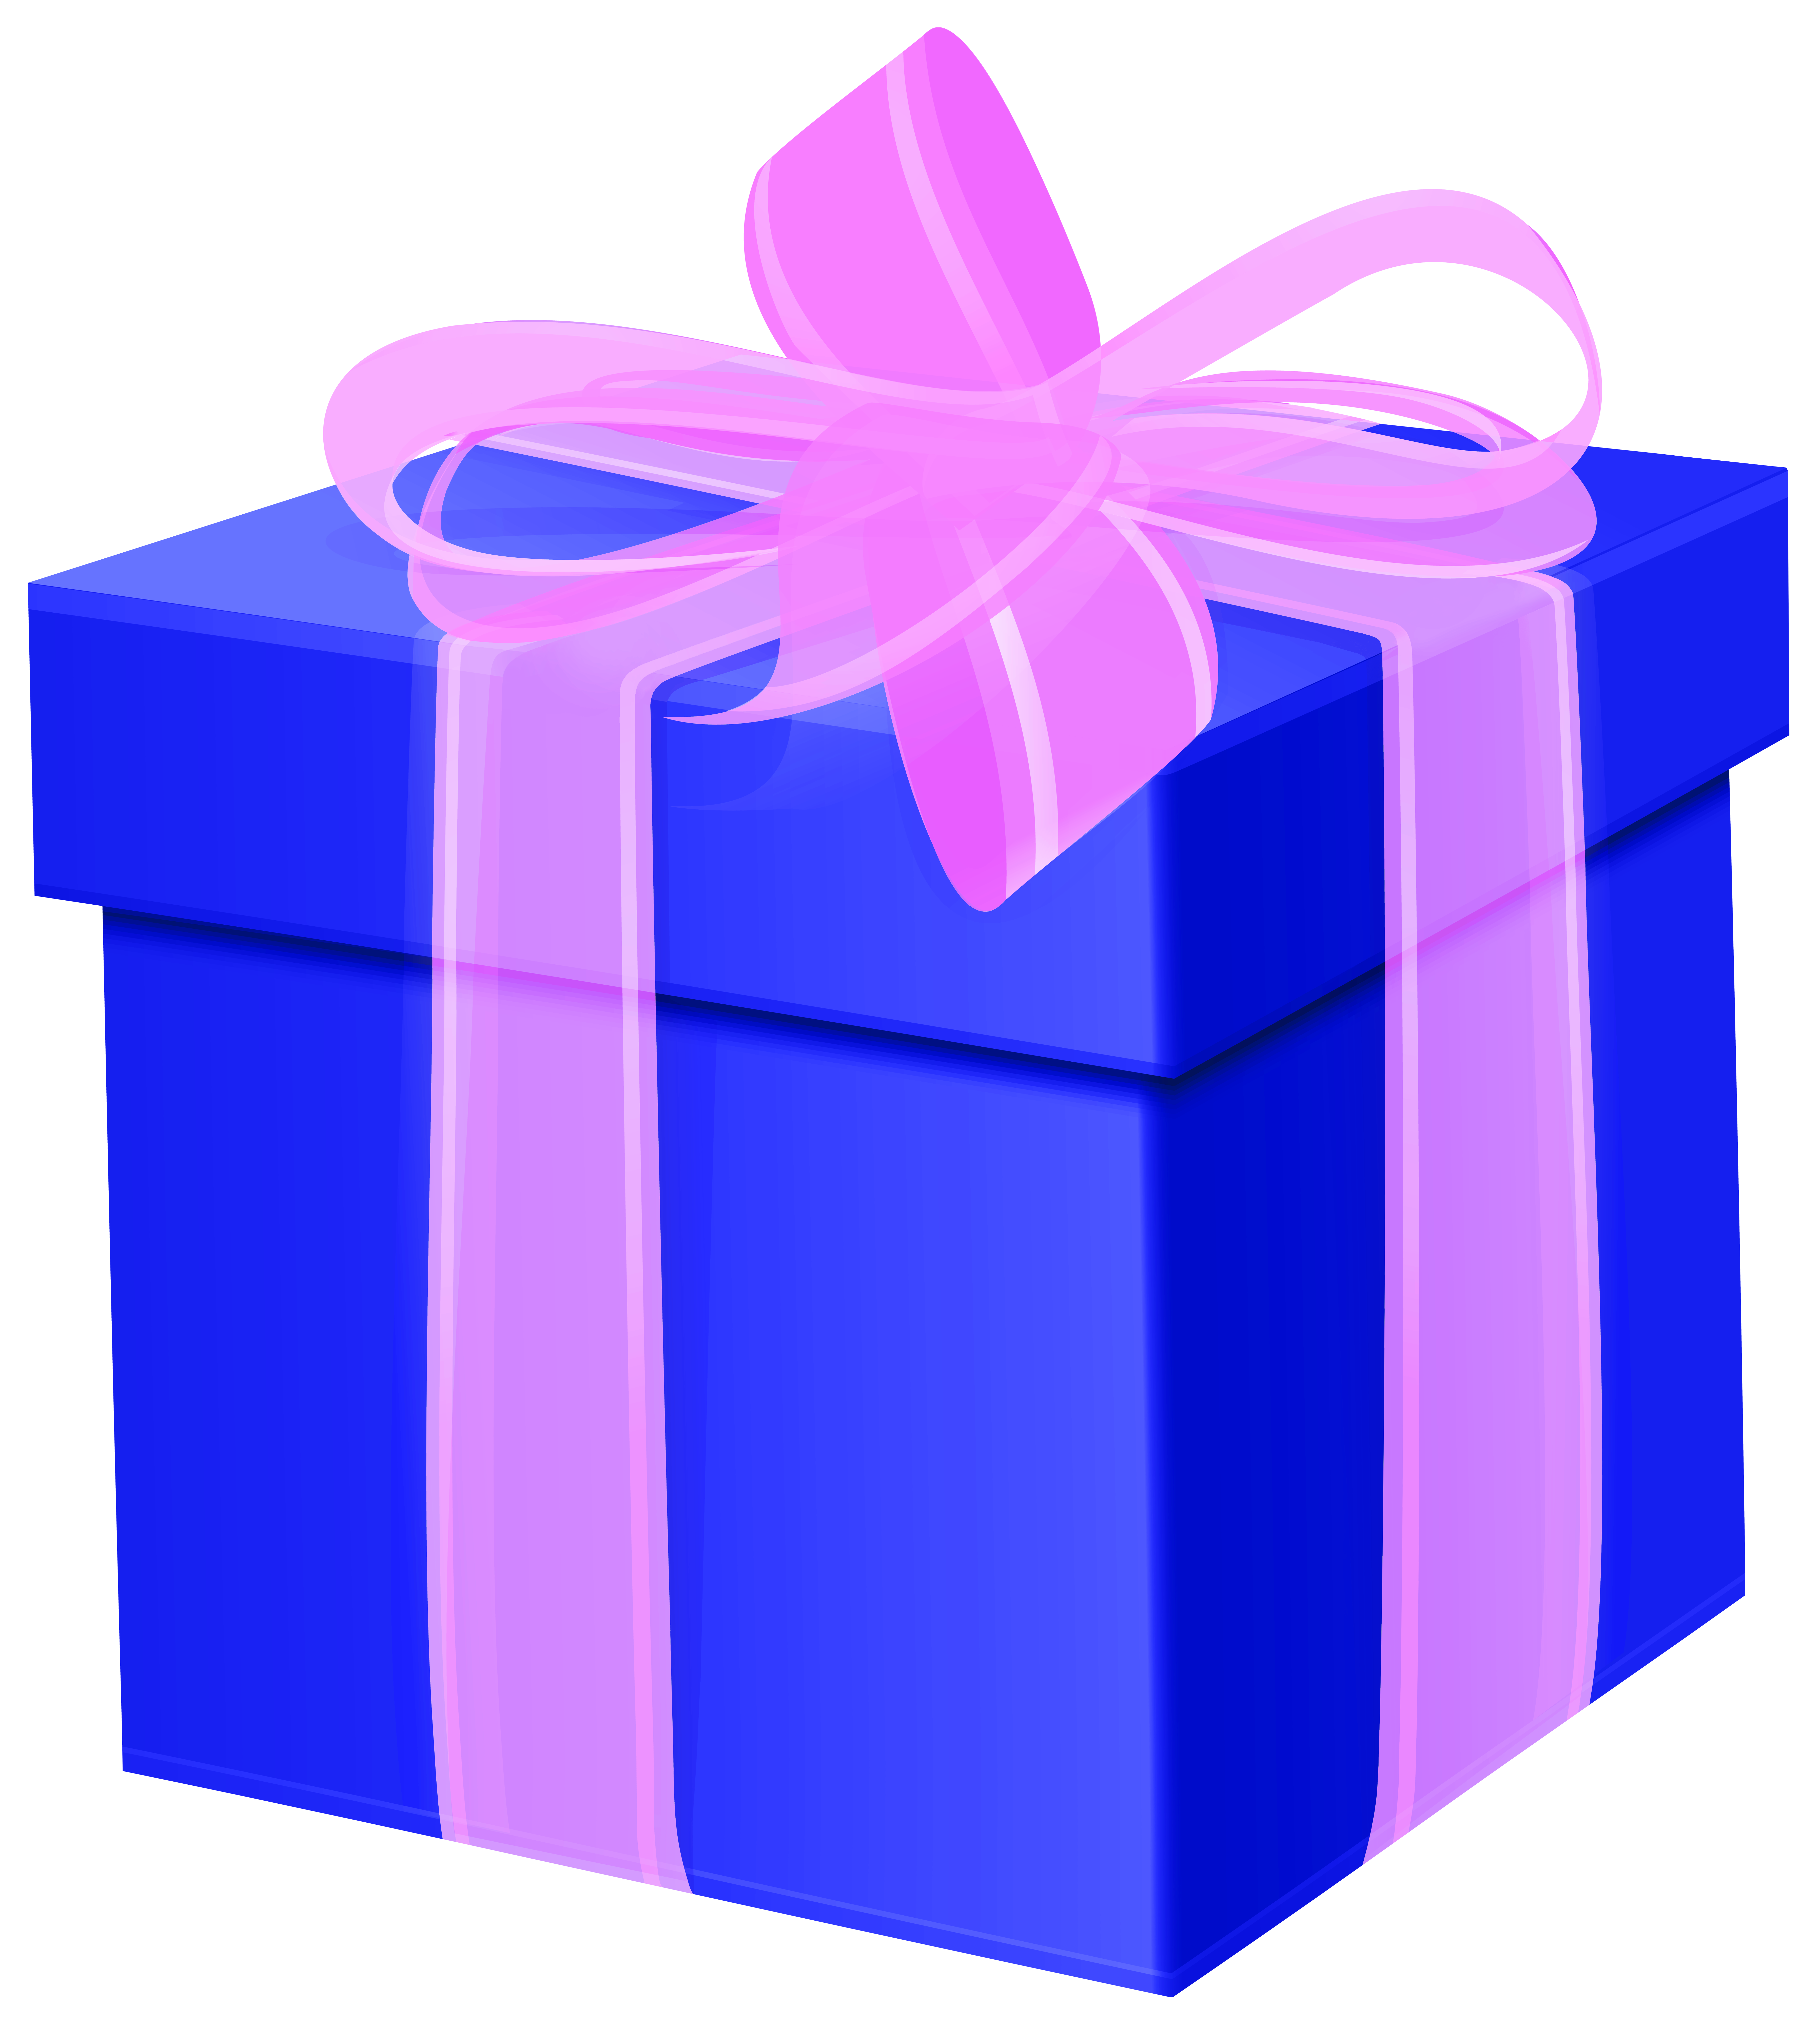 https://gallery.yopriceville.com/var/albums/Free-Clipart-Pictures/Gifts-and-Chocolates-PNG-/Gift_Blue_Box_PNG_Transparent_Clipart.png?m=1649091940